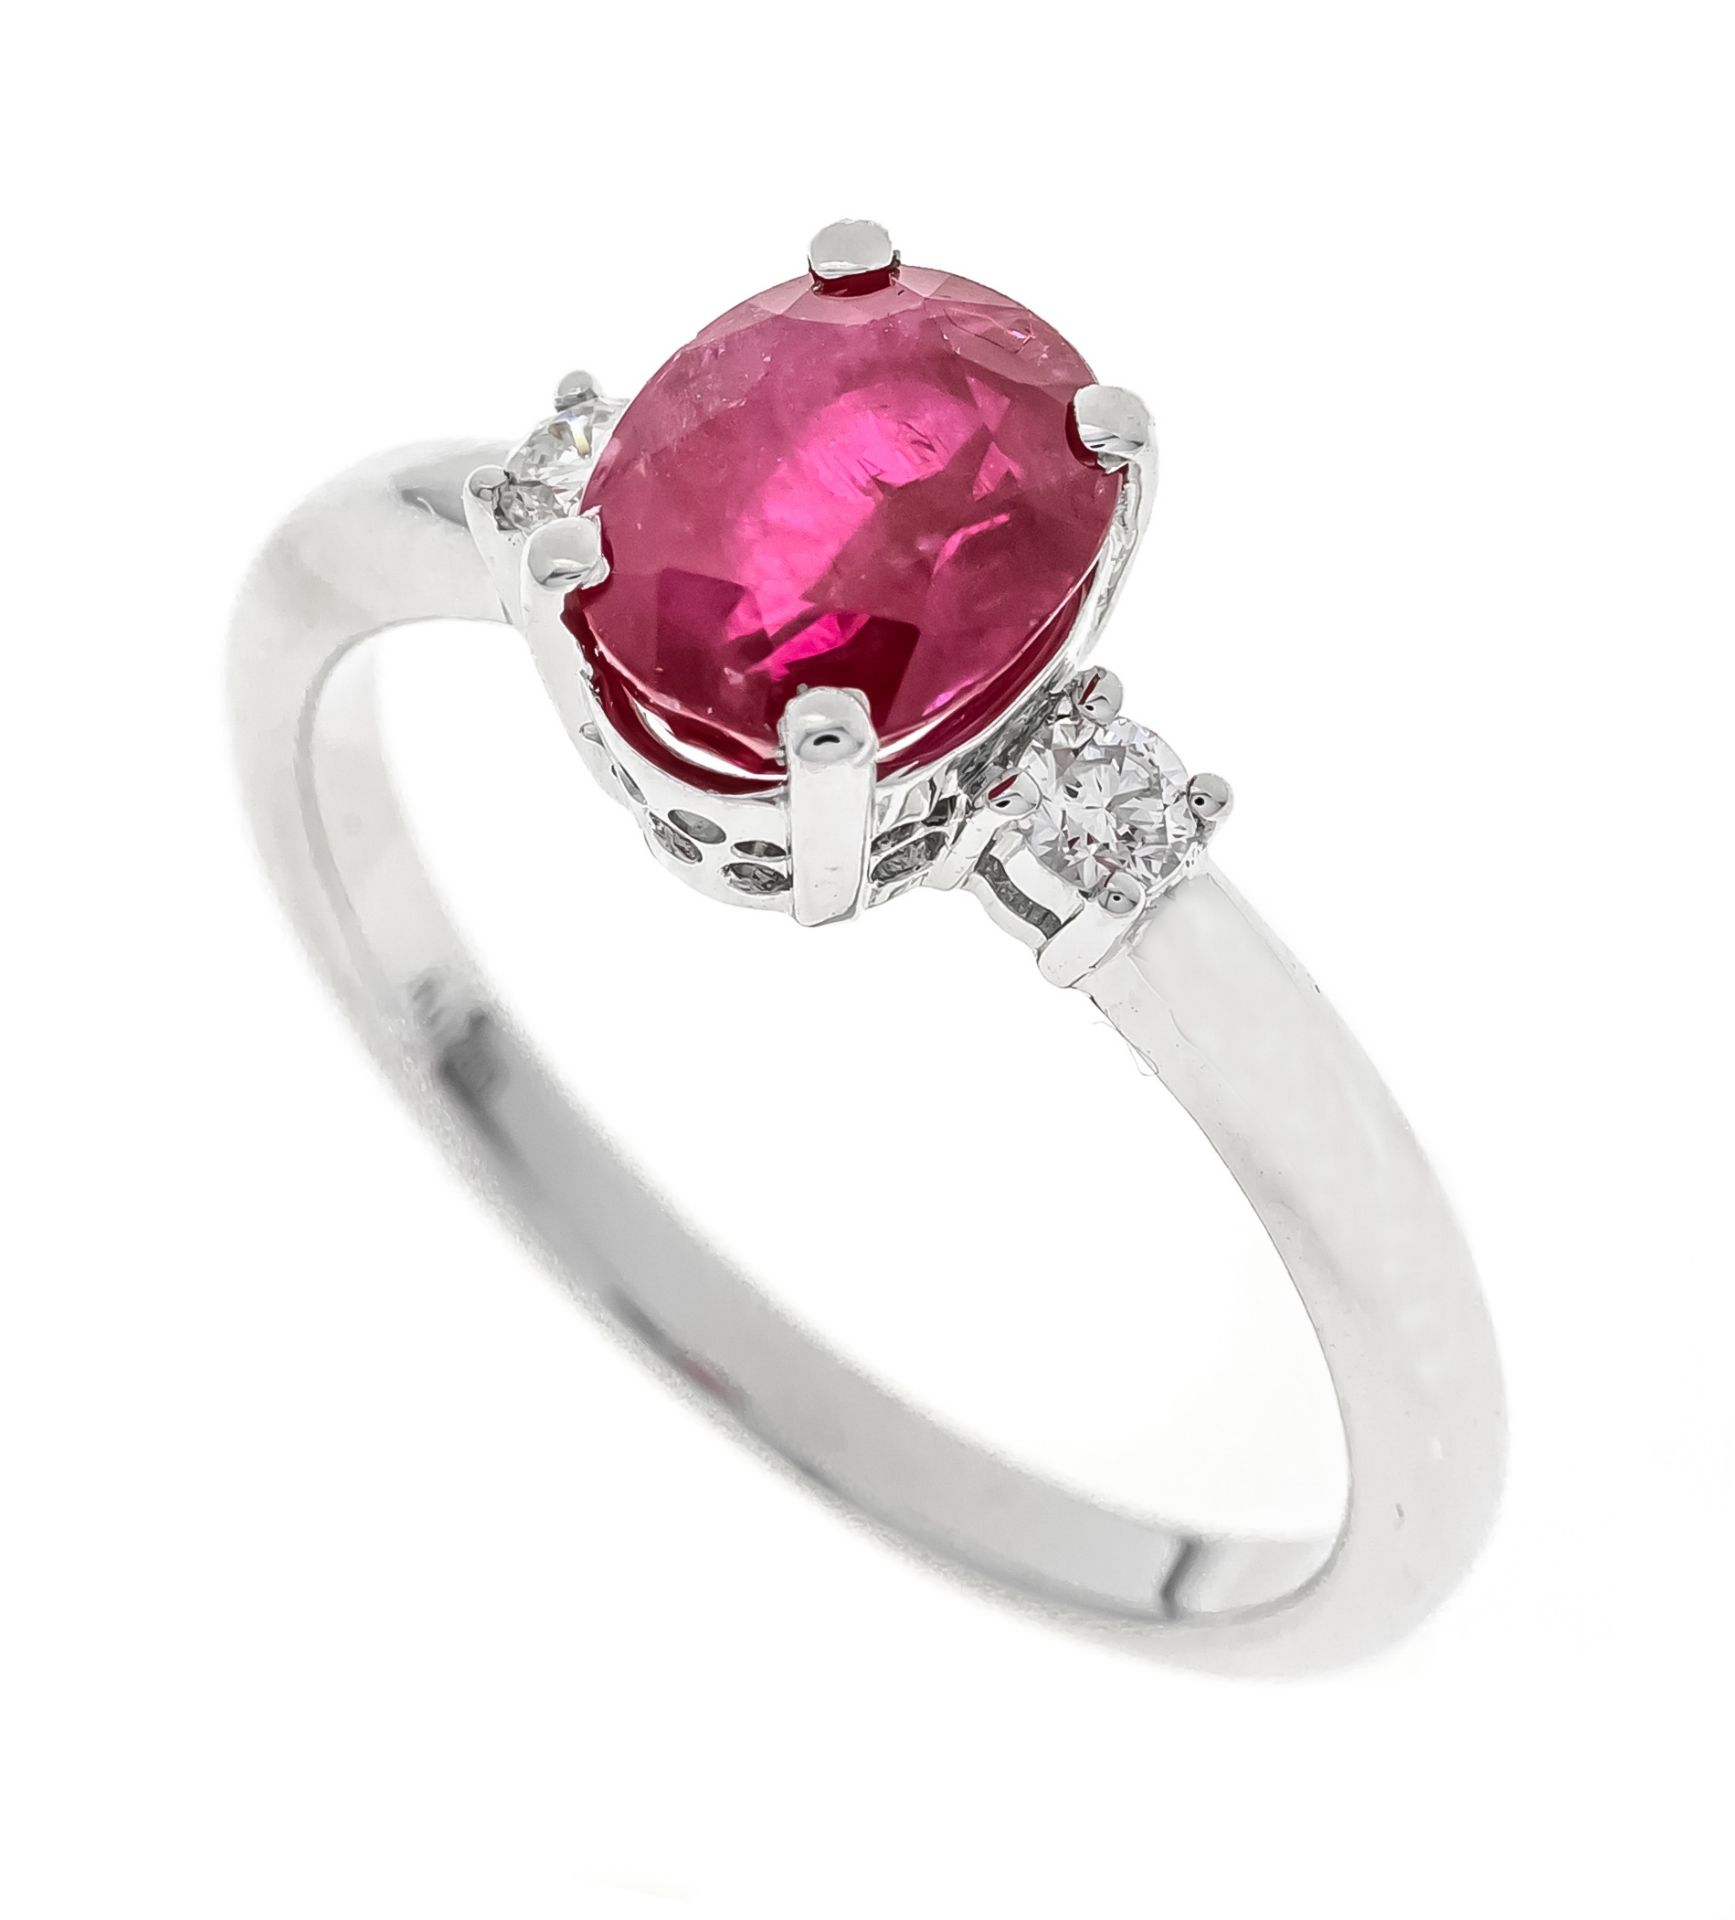 Ruby brilliant ring WG 750/000 with one oval faceted ruby 1,67 ct dark red, translucent, 7,24 x 6,10